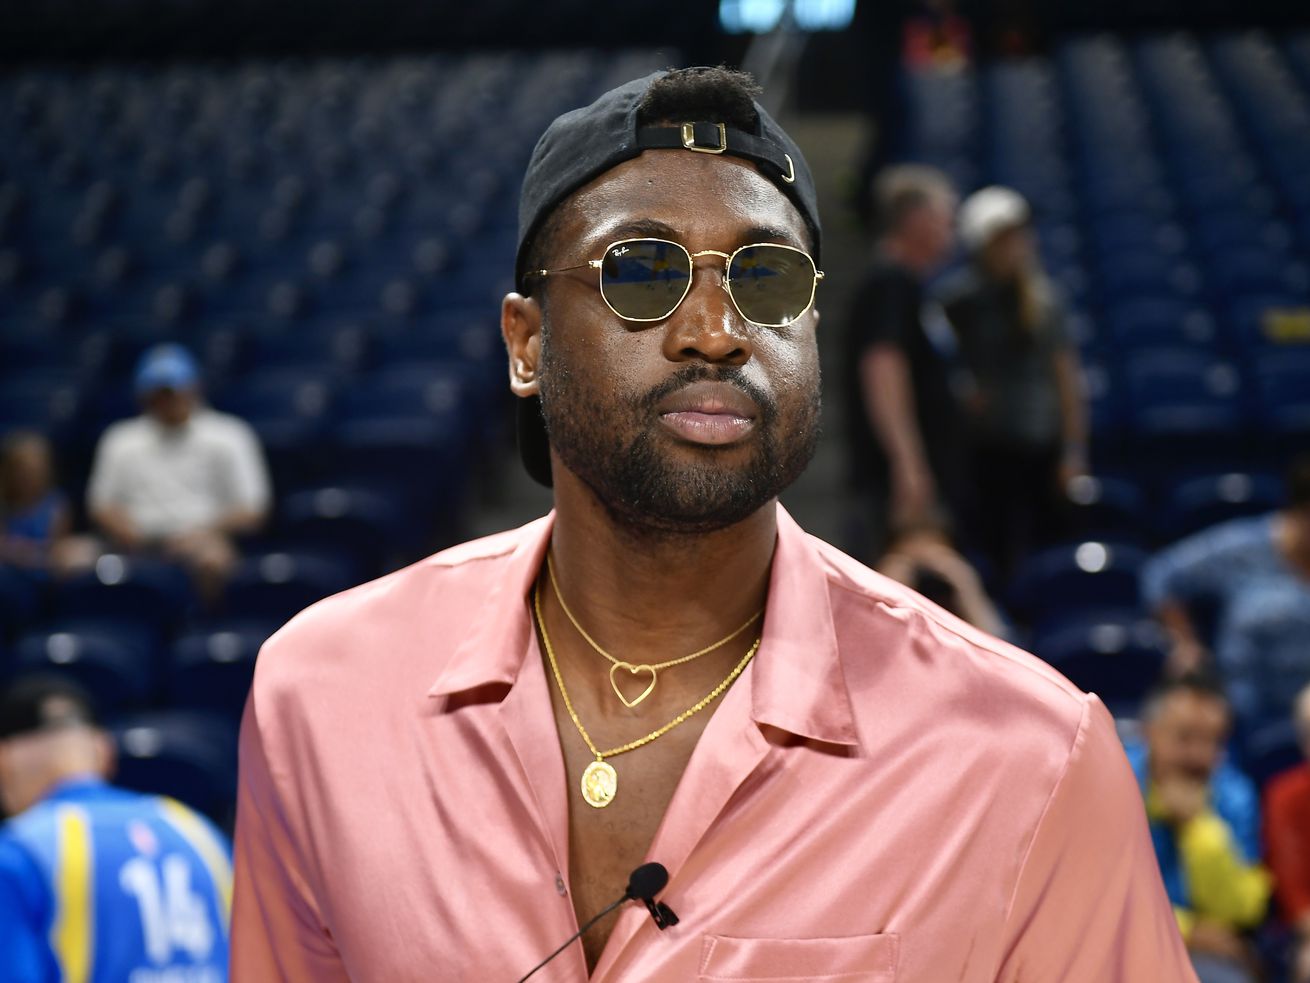 Wade, who was in Chicago hosting his annual youth basketball camp and attending a Sky game, said it’s time for the women in the WNBA to get their just dues and recognition.